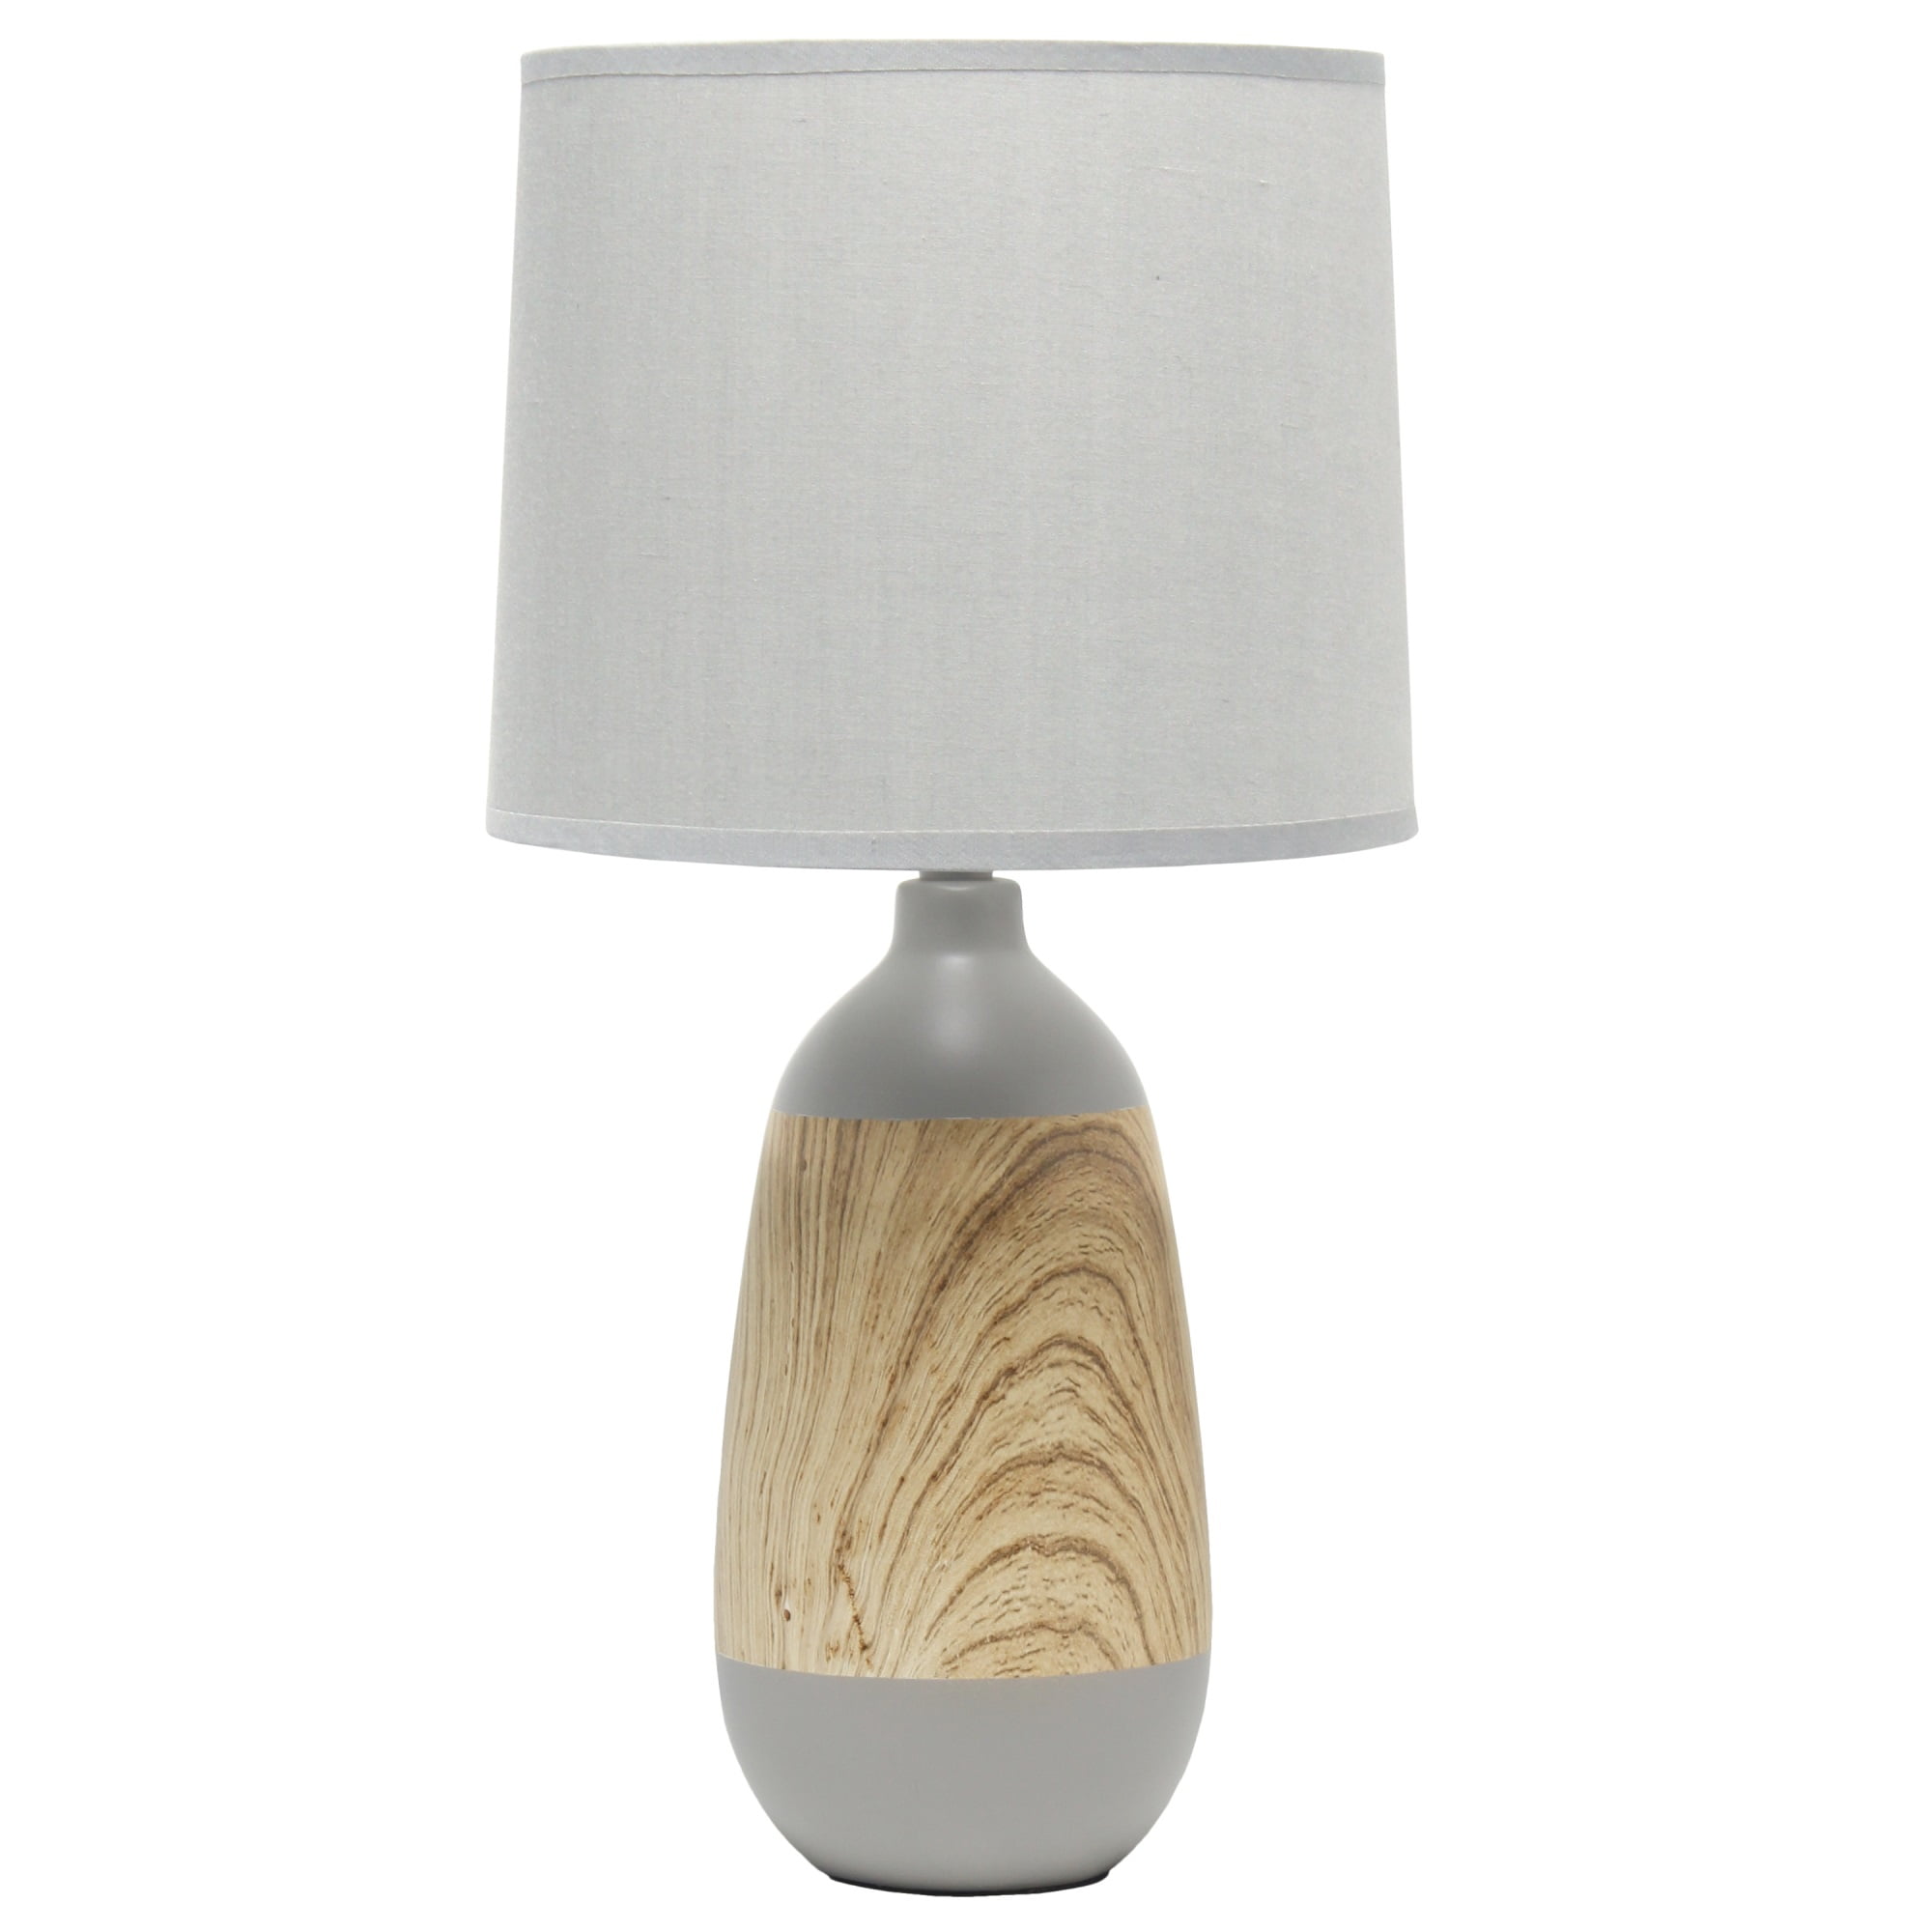 Simple Designs Ceramic Oblong Table Lamp, Light Wood and Gray